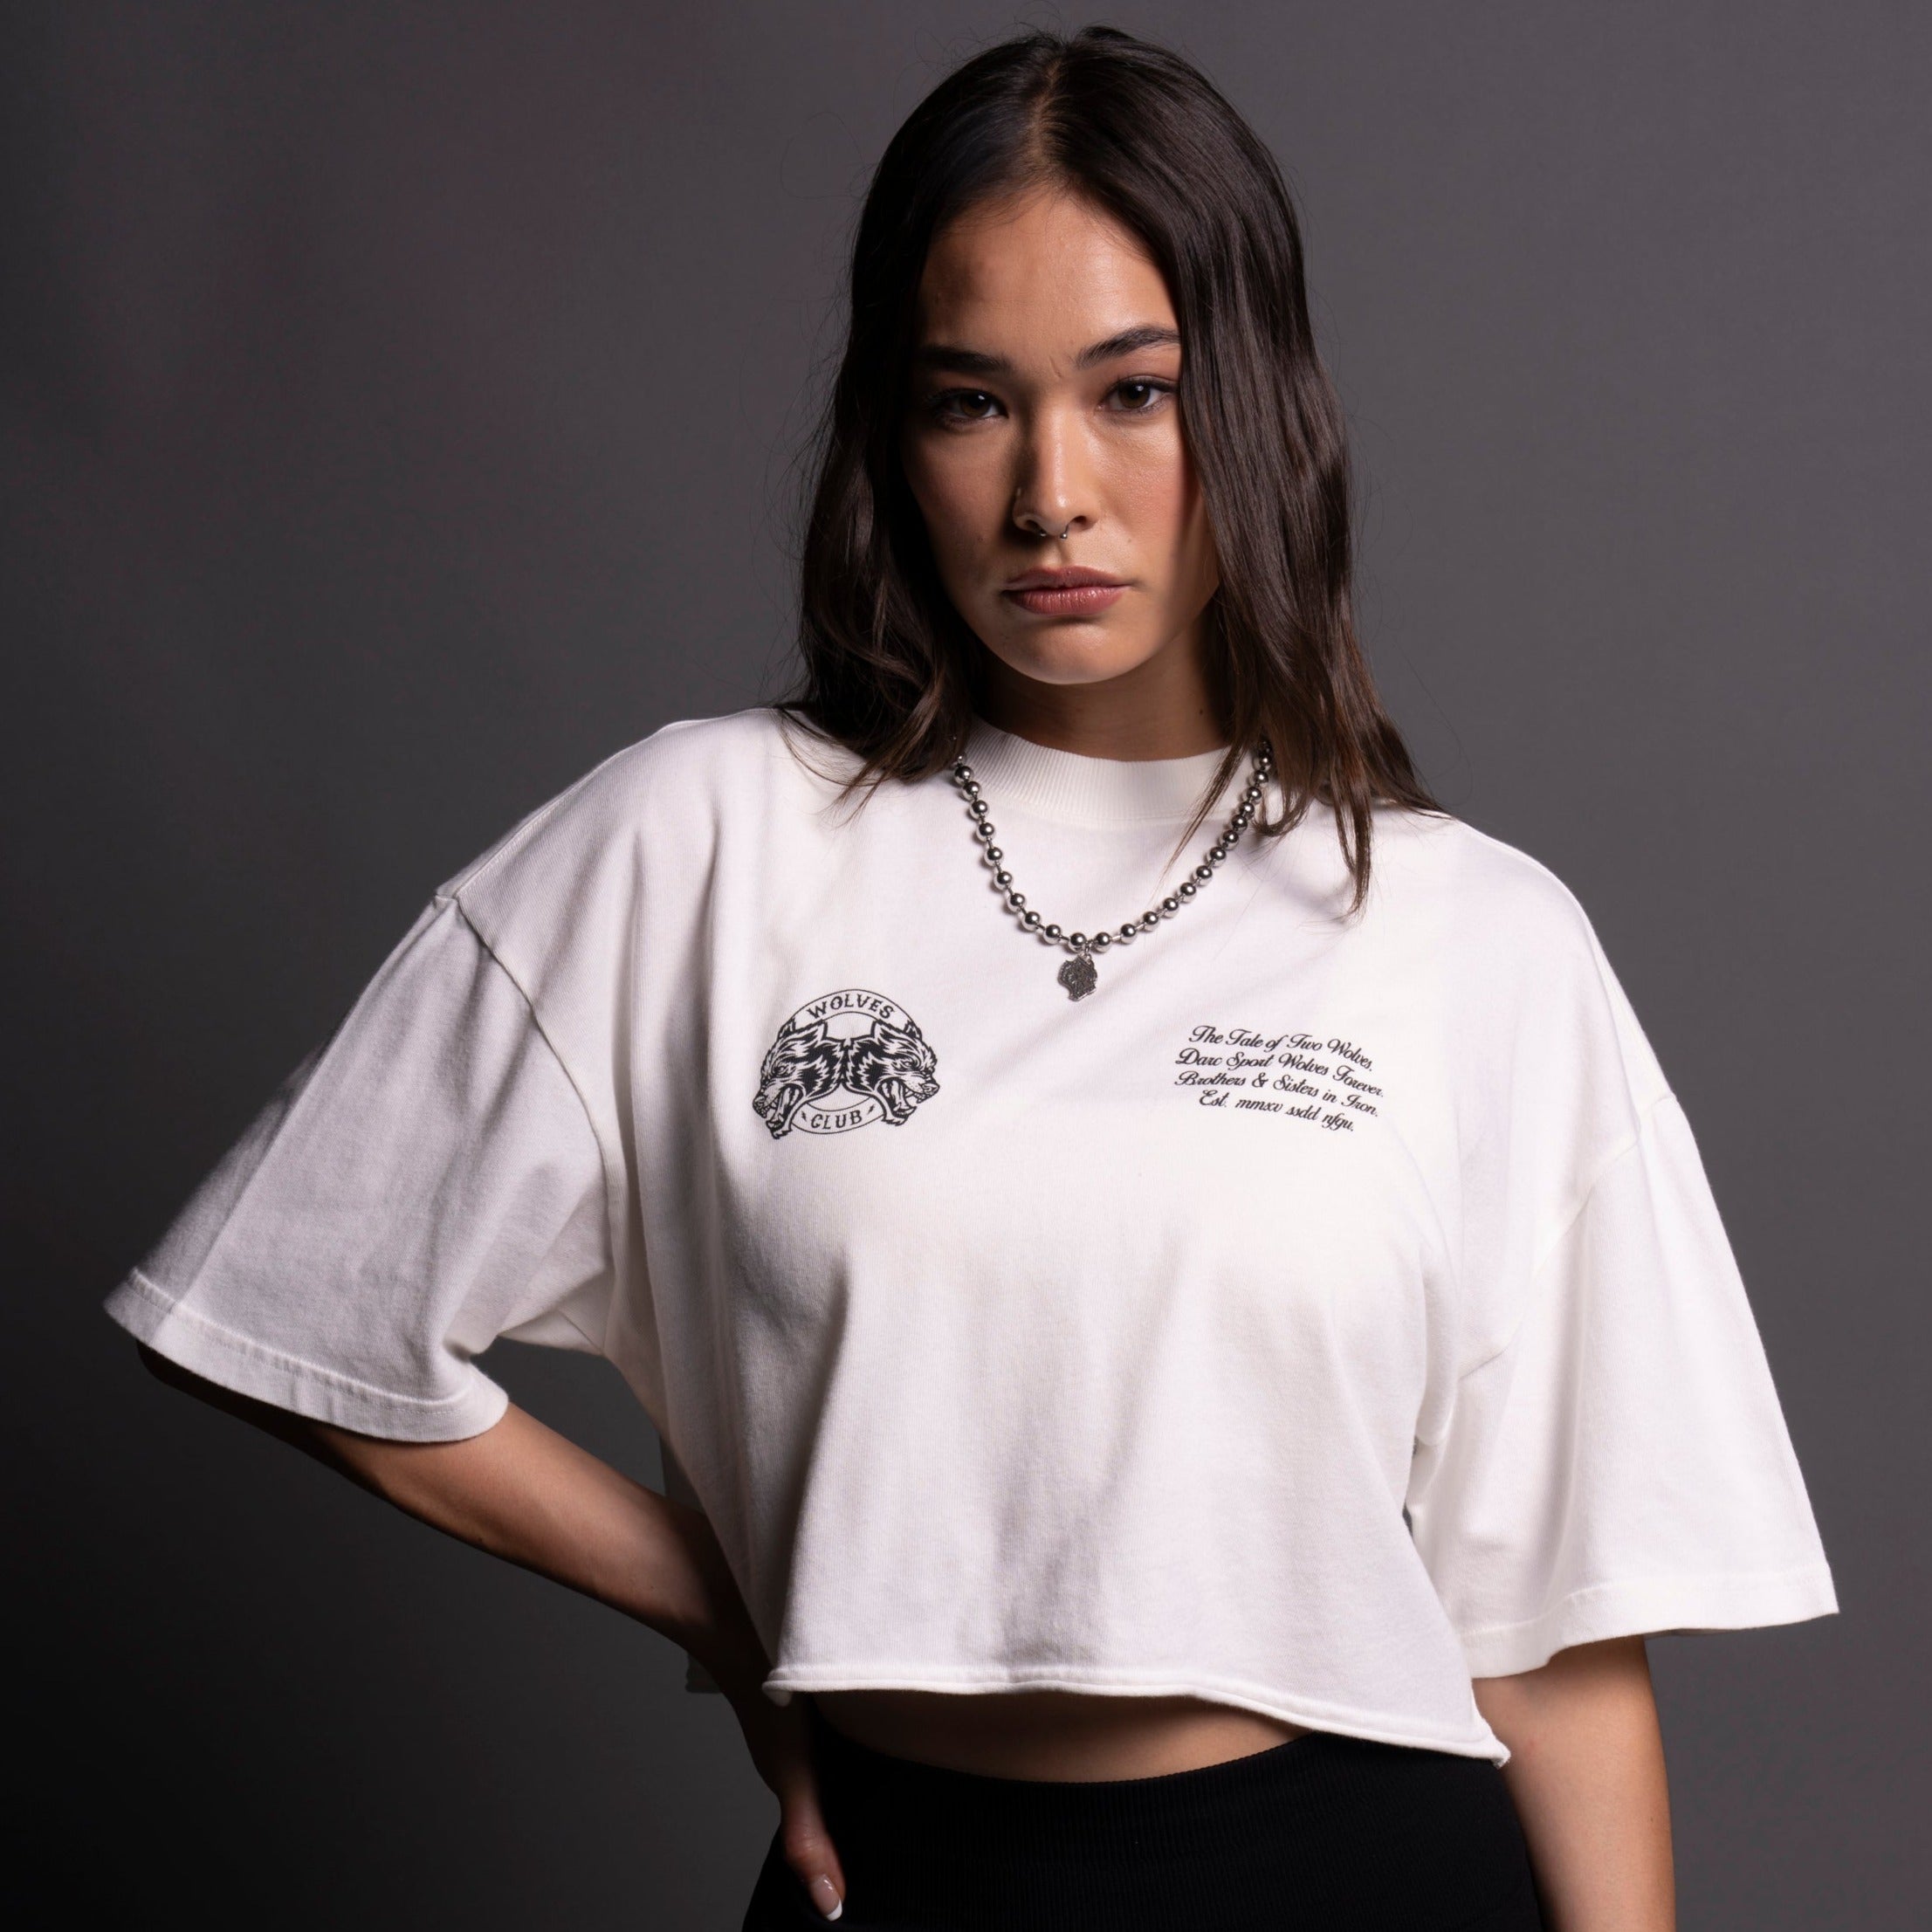 Outside "Premium Vintage" Oversized (Cropped) Tee in Cream